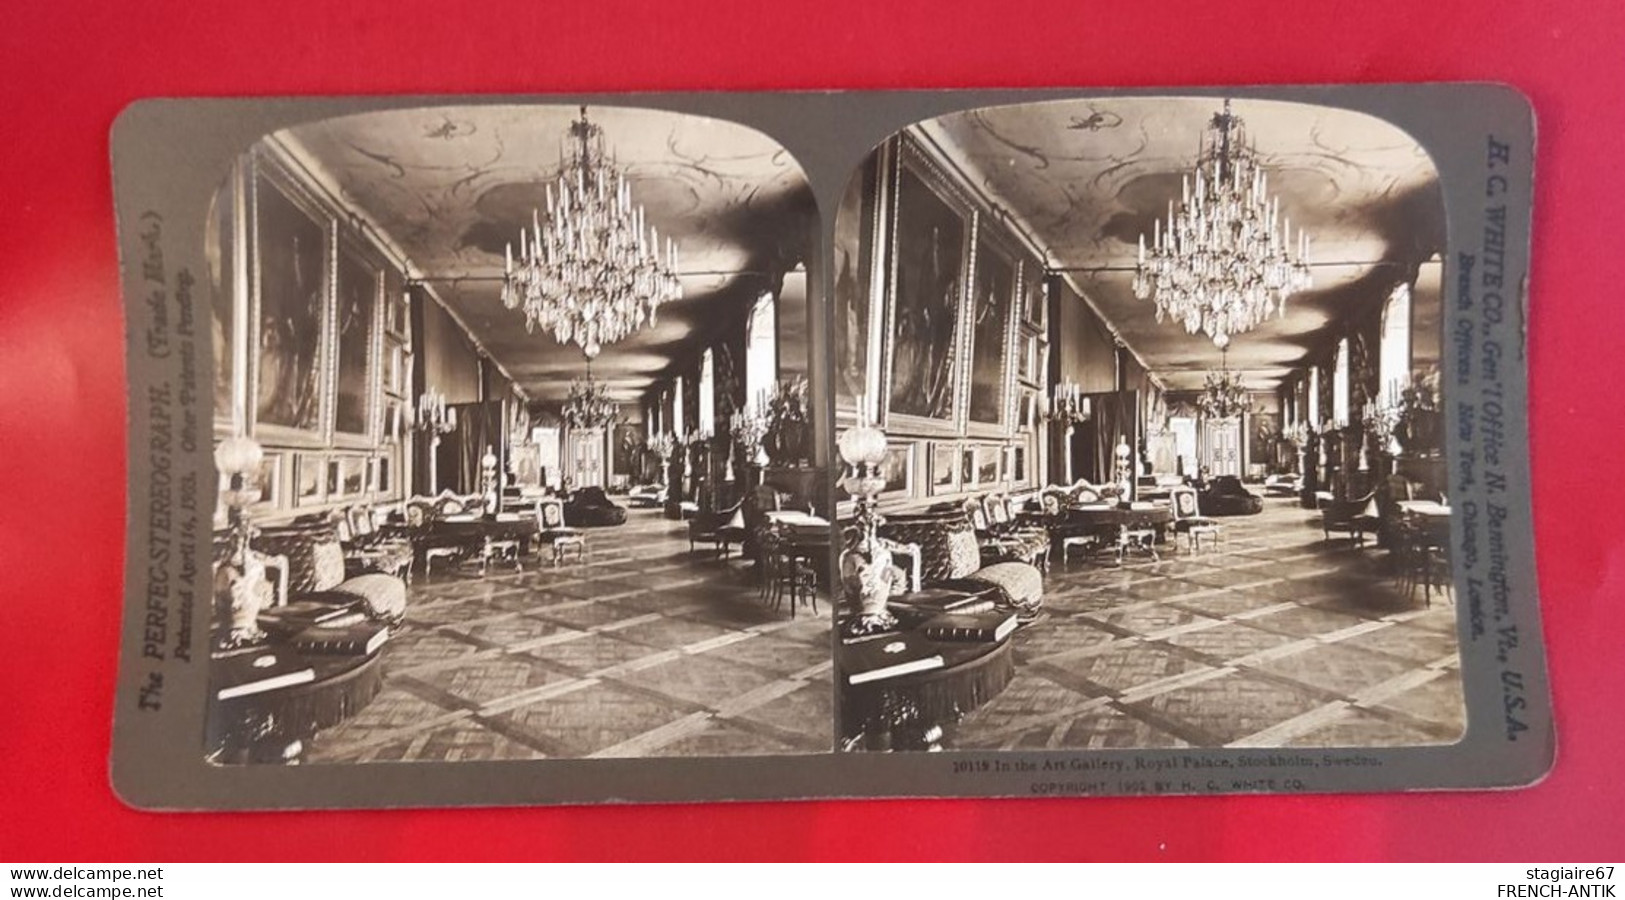 STÉRÉO H.C. WHITE CO USA IN THE ART GALLERY ROYAL PALACE STOCKHOLM SWEDEN - Stereo-Photographie